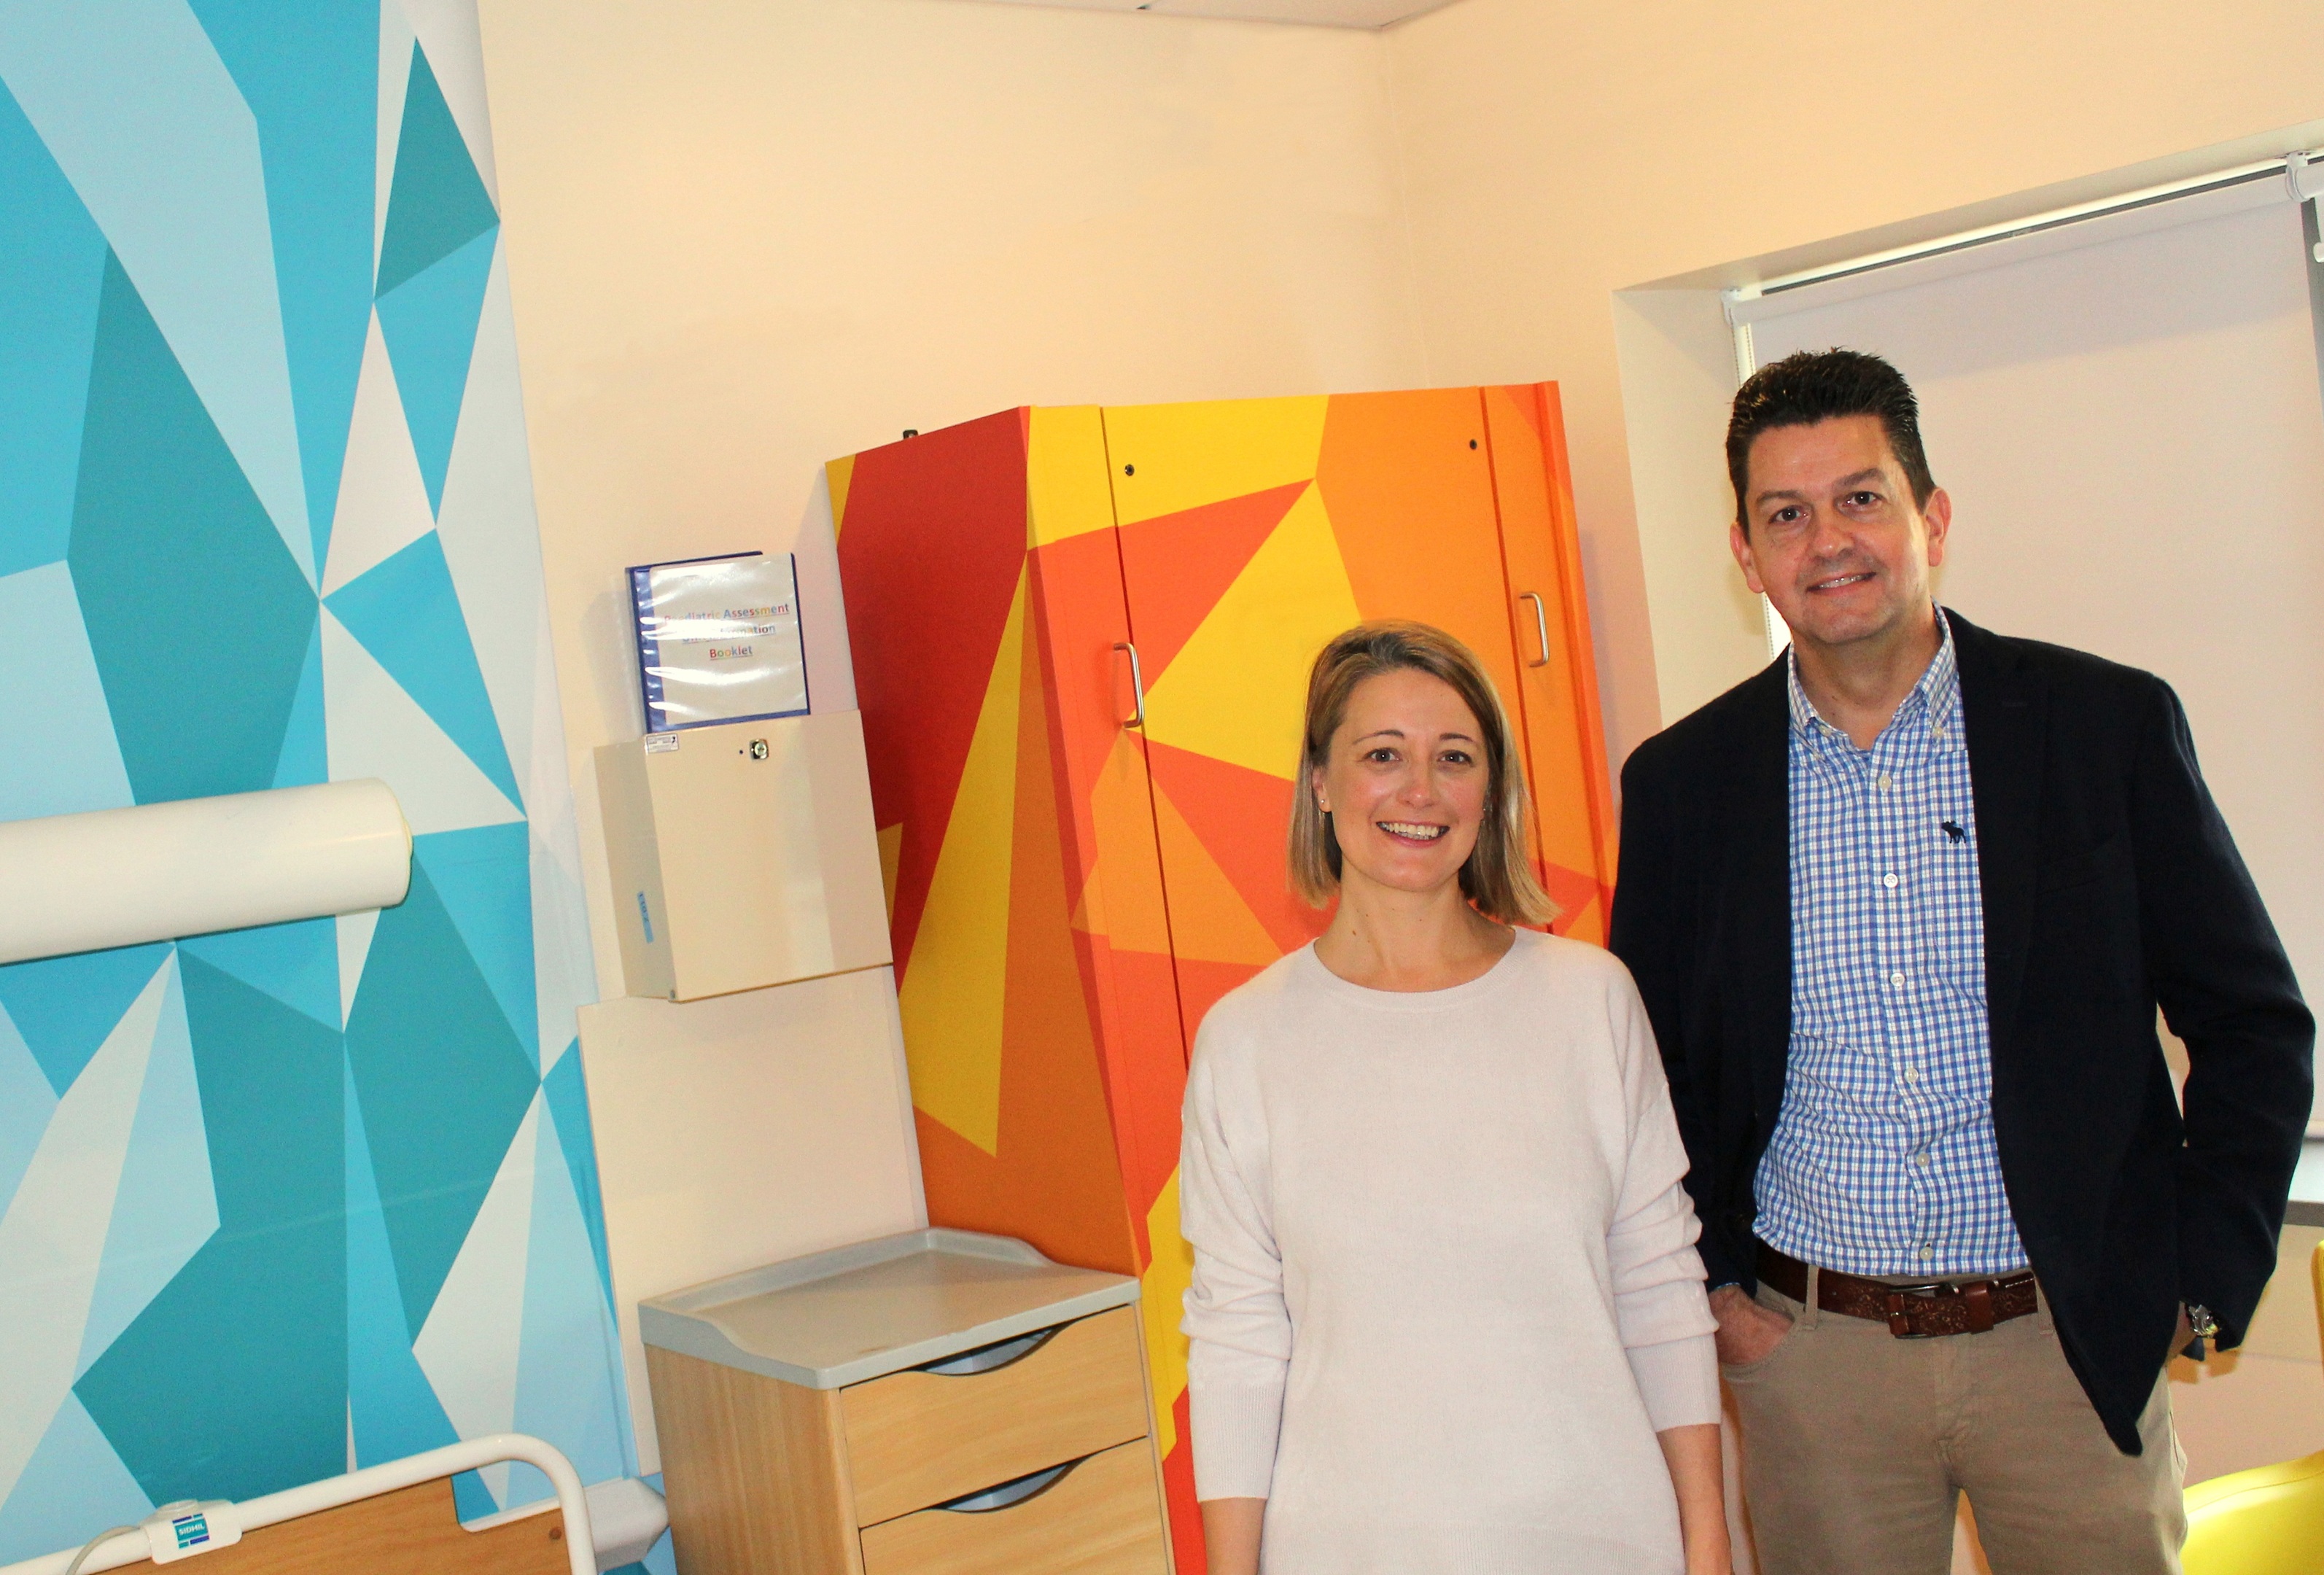 The photo shows Cassie Thompson, ARCHIE Director of Partnerships and Charlie Parker, Financial Director of the John Lawrie Group in one of the refurbished rooms.